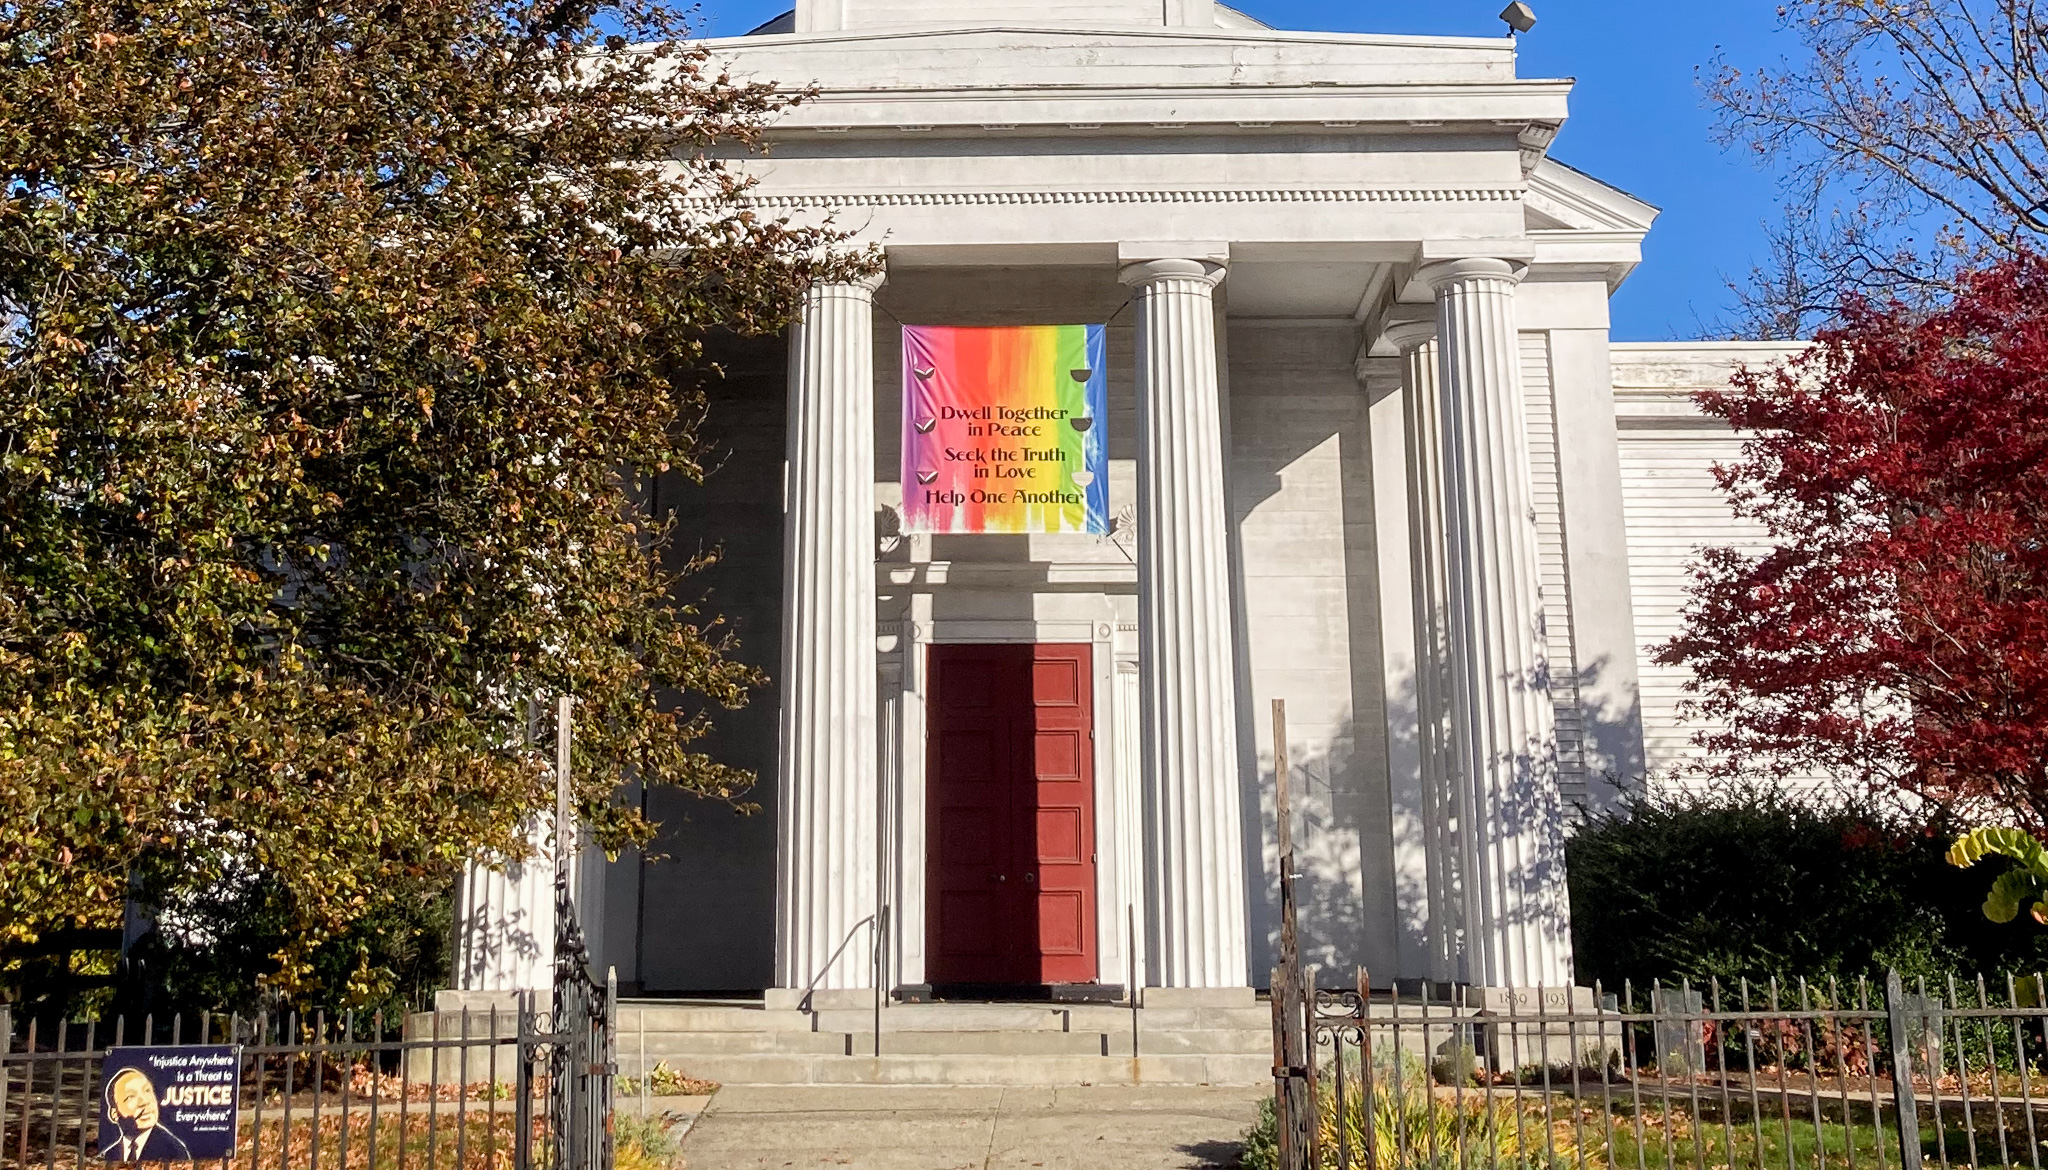 Church portico with tall white columns and a banner saying "Dwell together in peace, Seek the truth in love, and help one another".